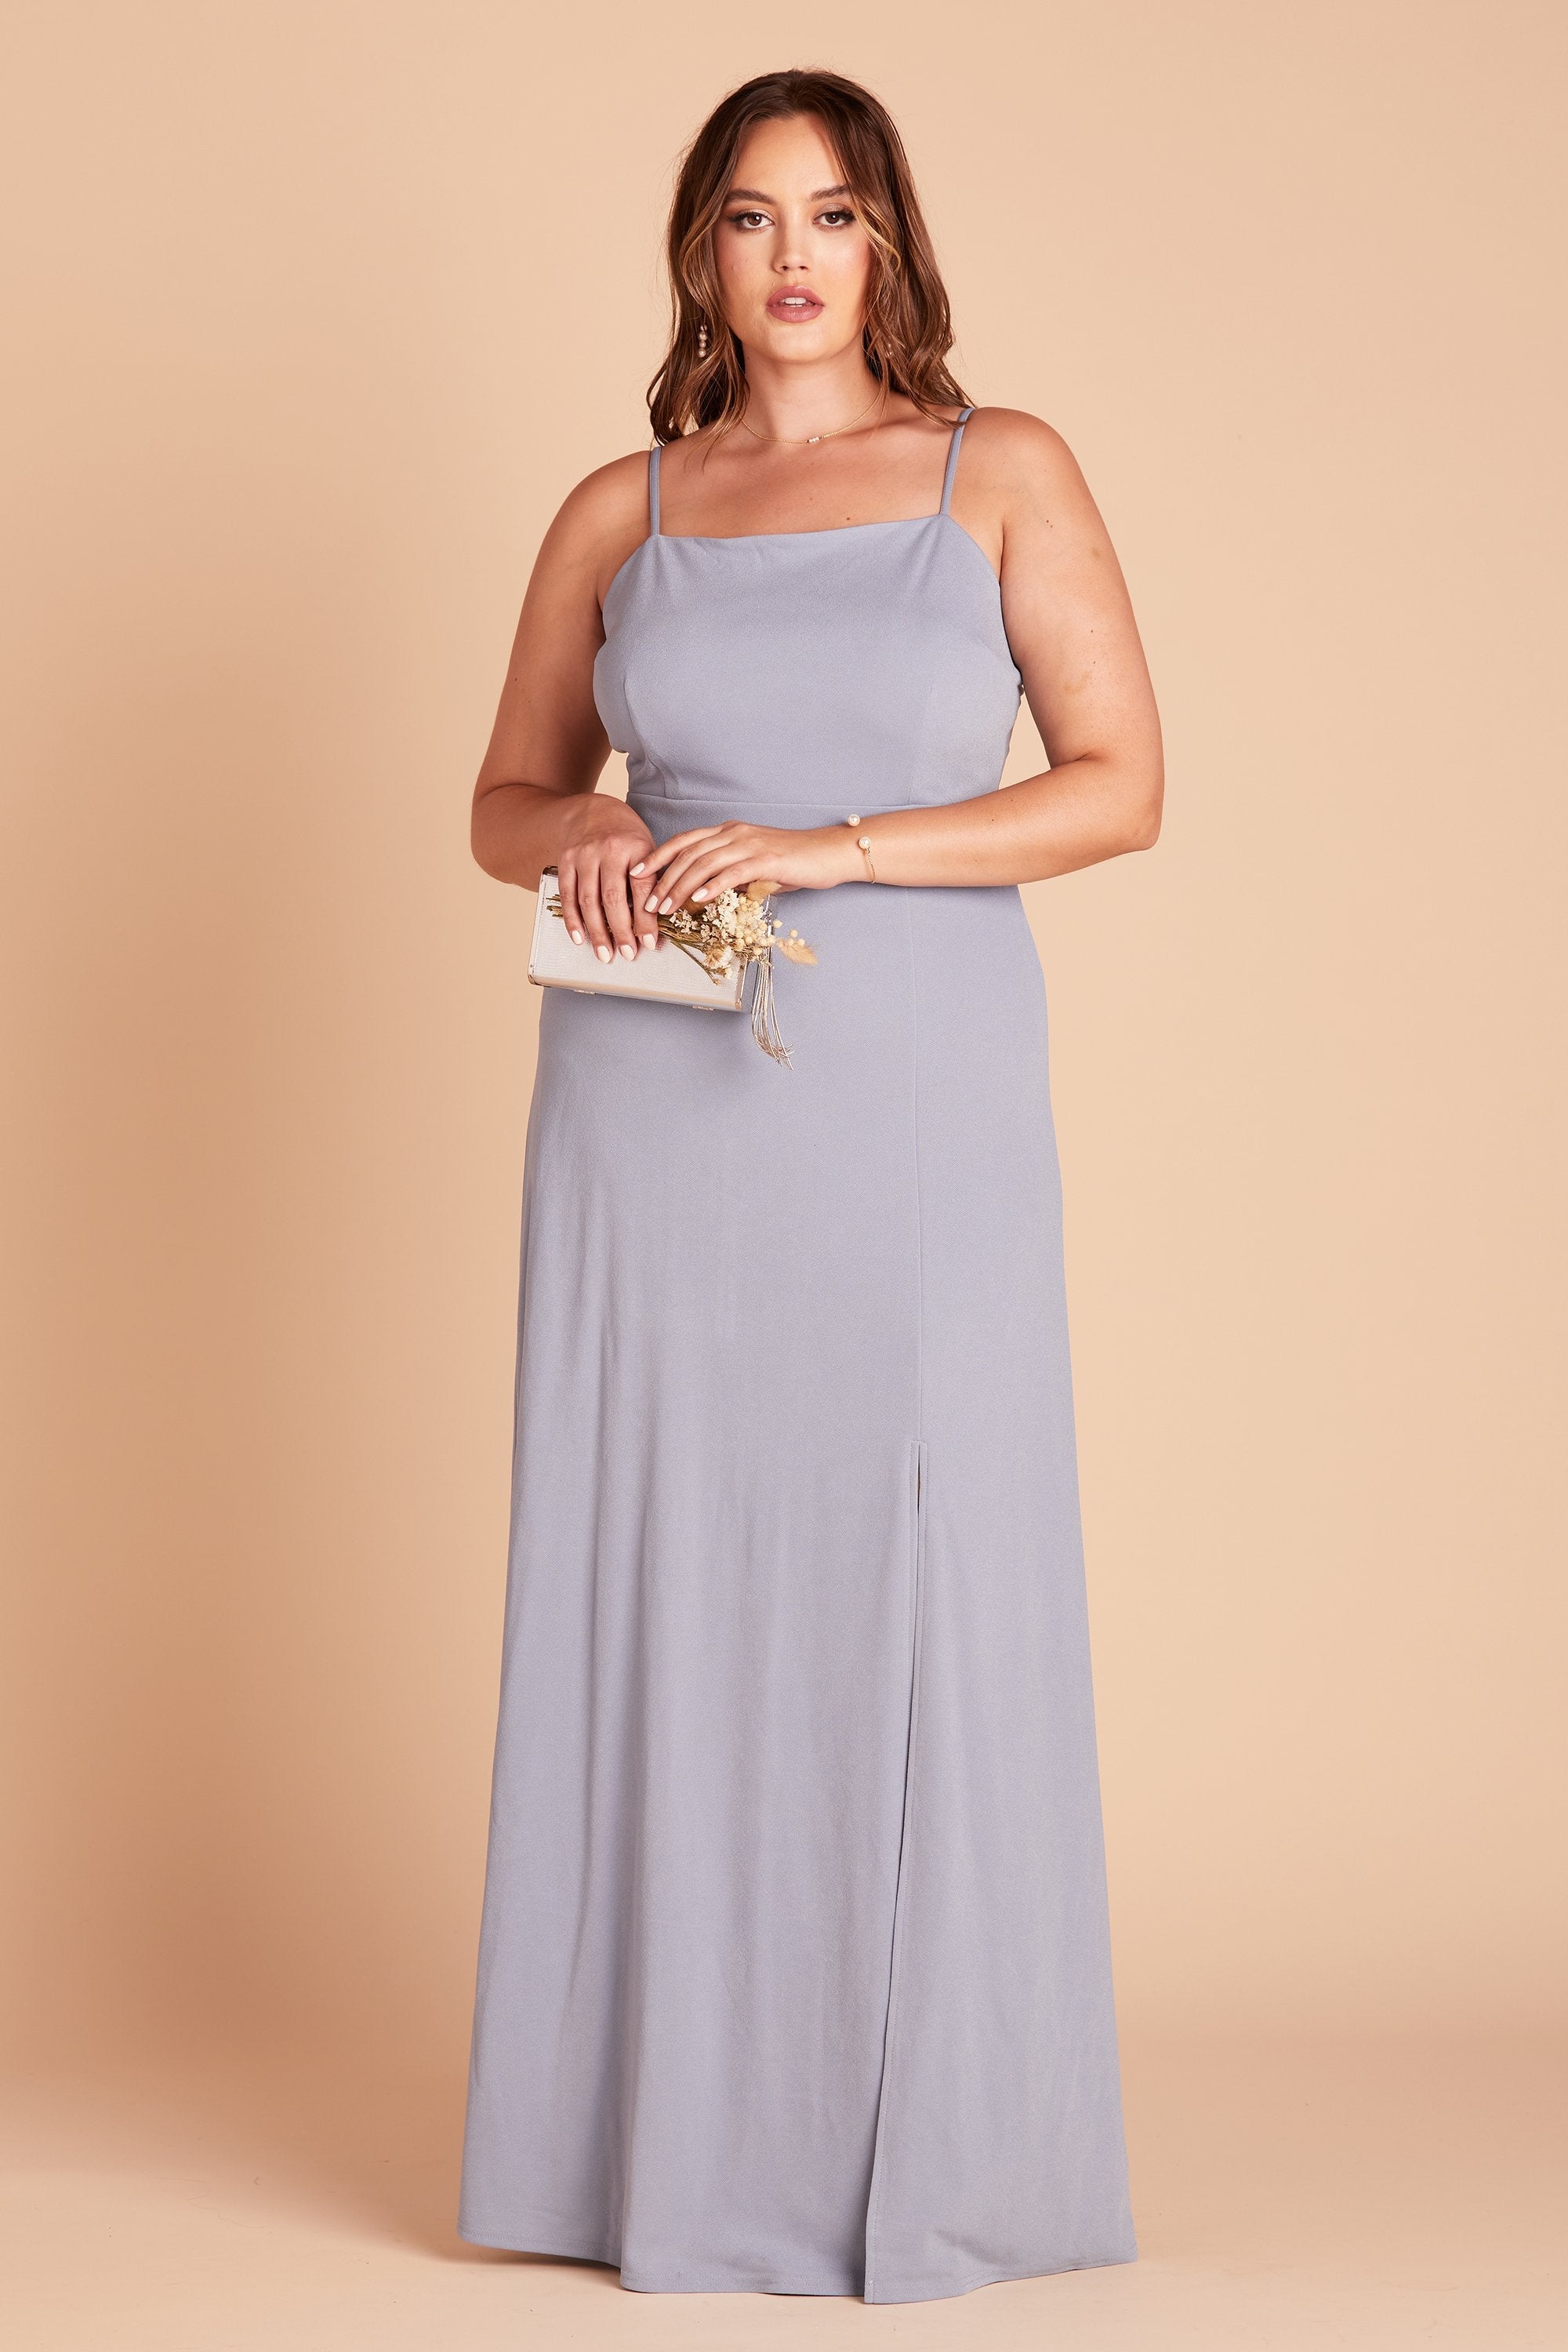 Benny plus size bridesmaid dress in dusty blue crepe by Birdy Grey, front view